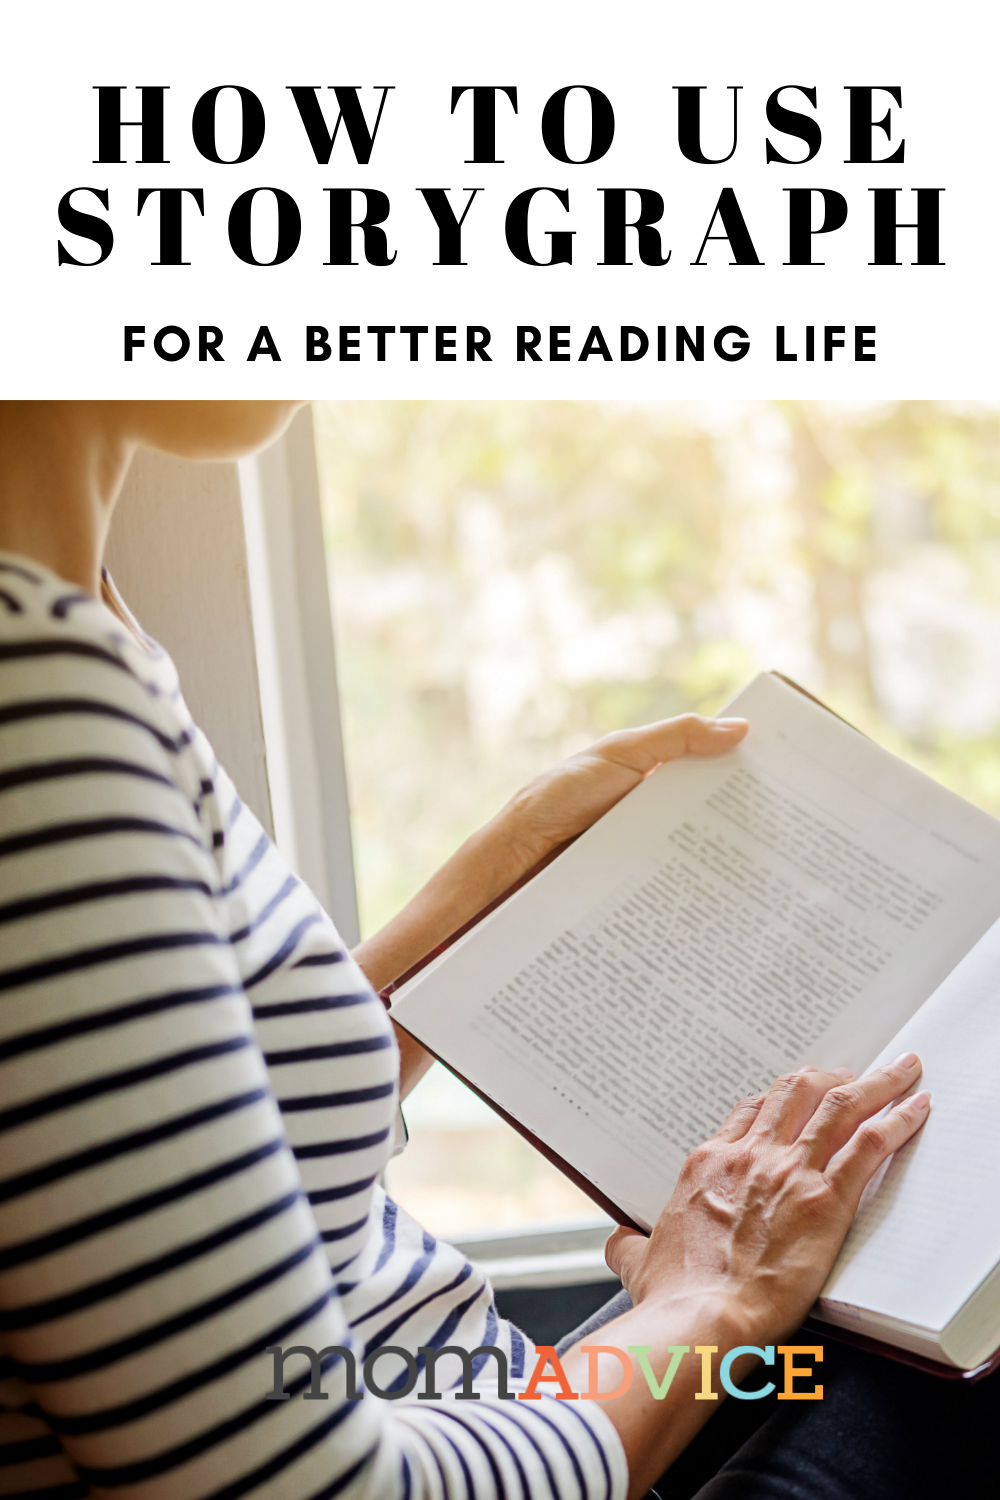 How to Use the Storygraph App For a Better Reading Life